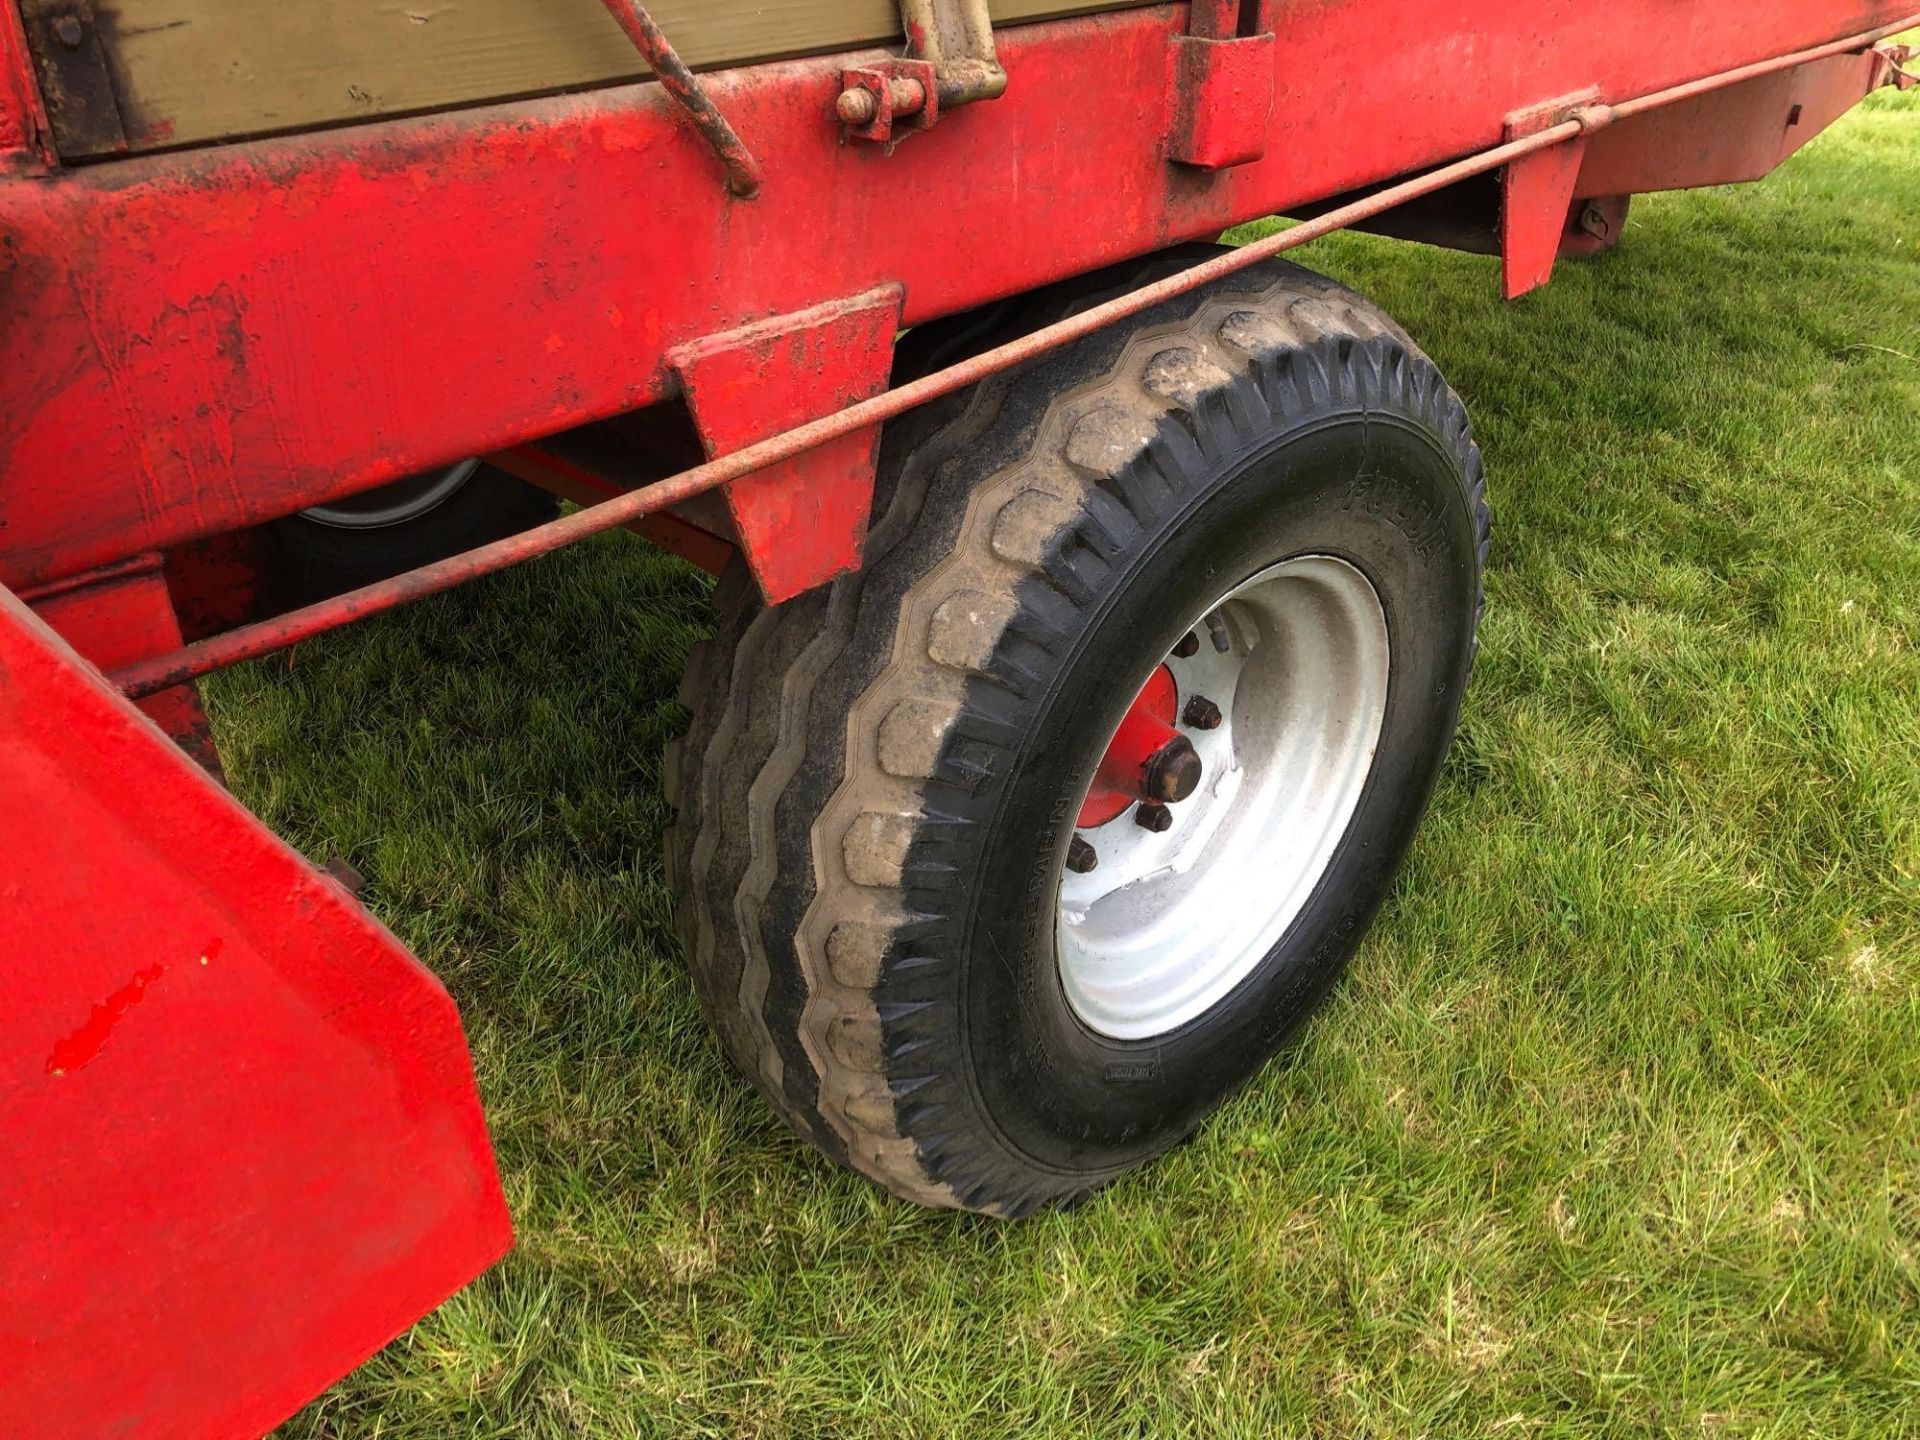 1978 Krone Optimat 4t rear discharge manure spreader with walking floor on 11.5/80-15 wheels and tyr - Image 4 of 6